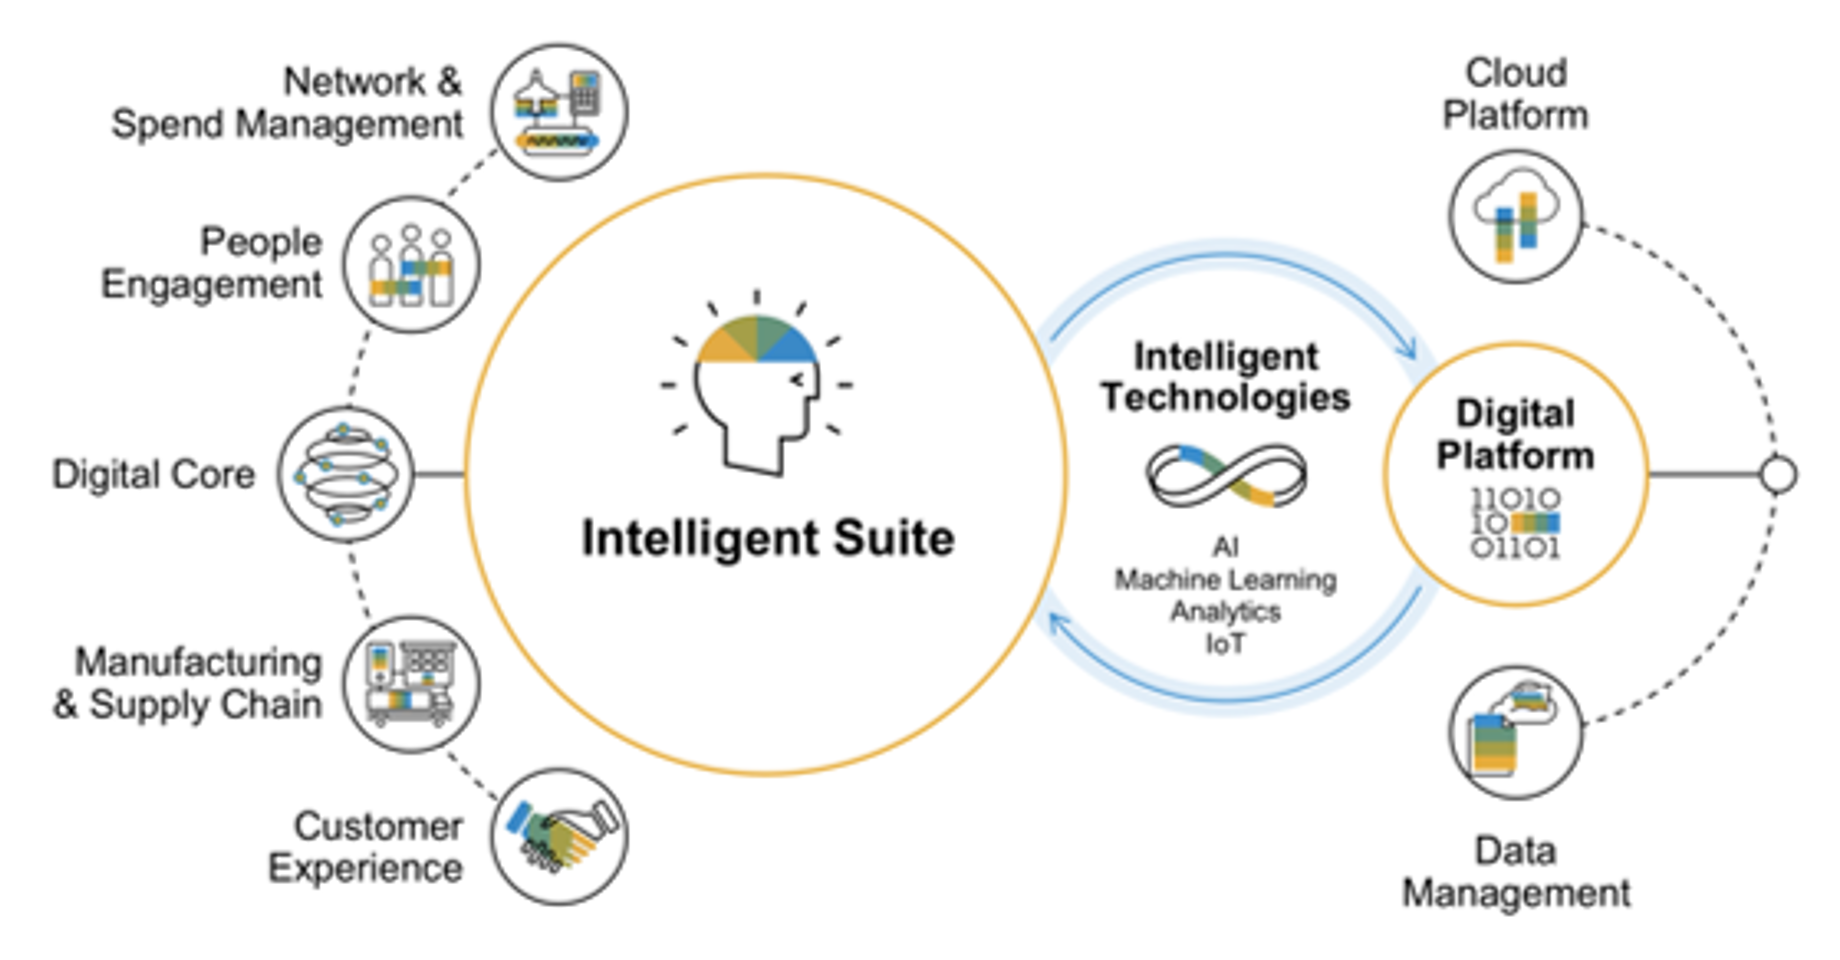 The equation for becoming an Intelligent Enterpris... - SAP Community